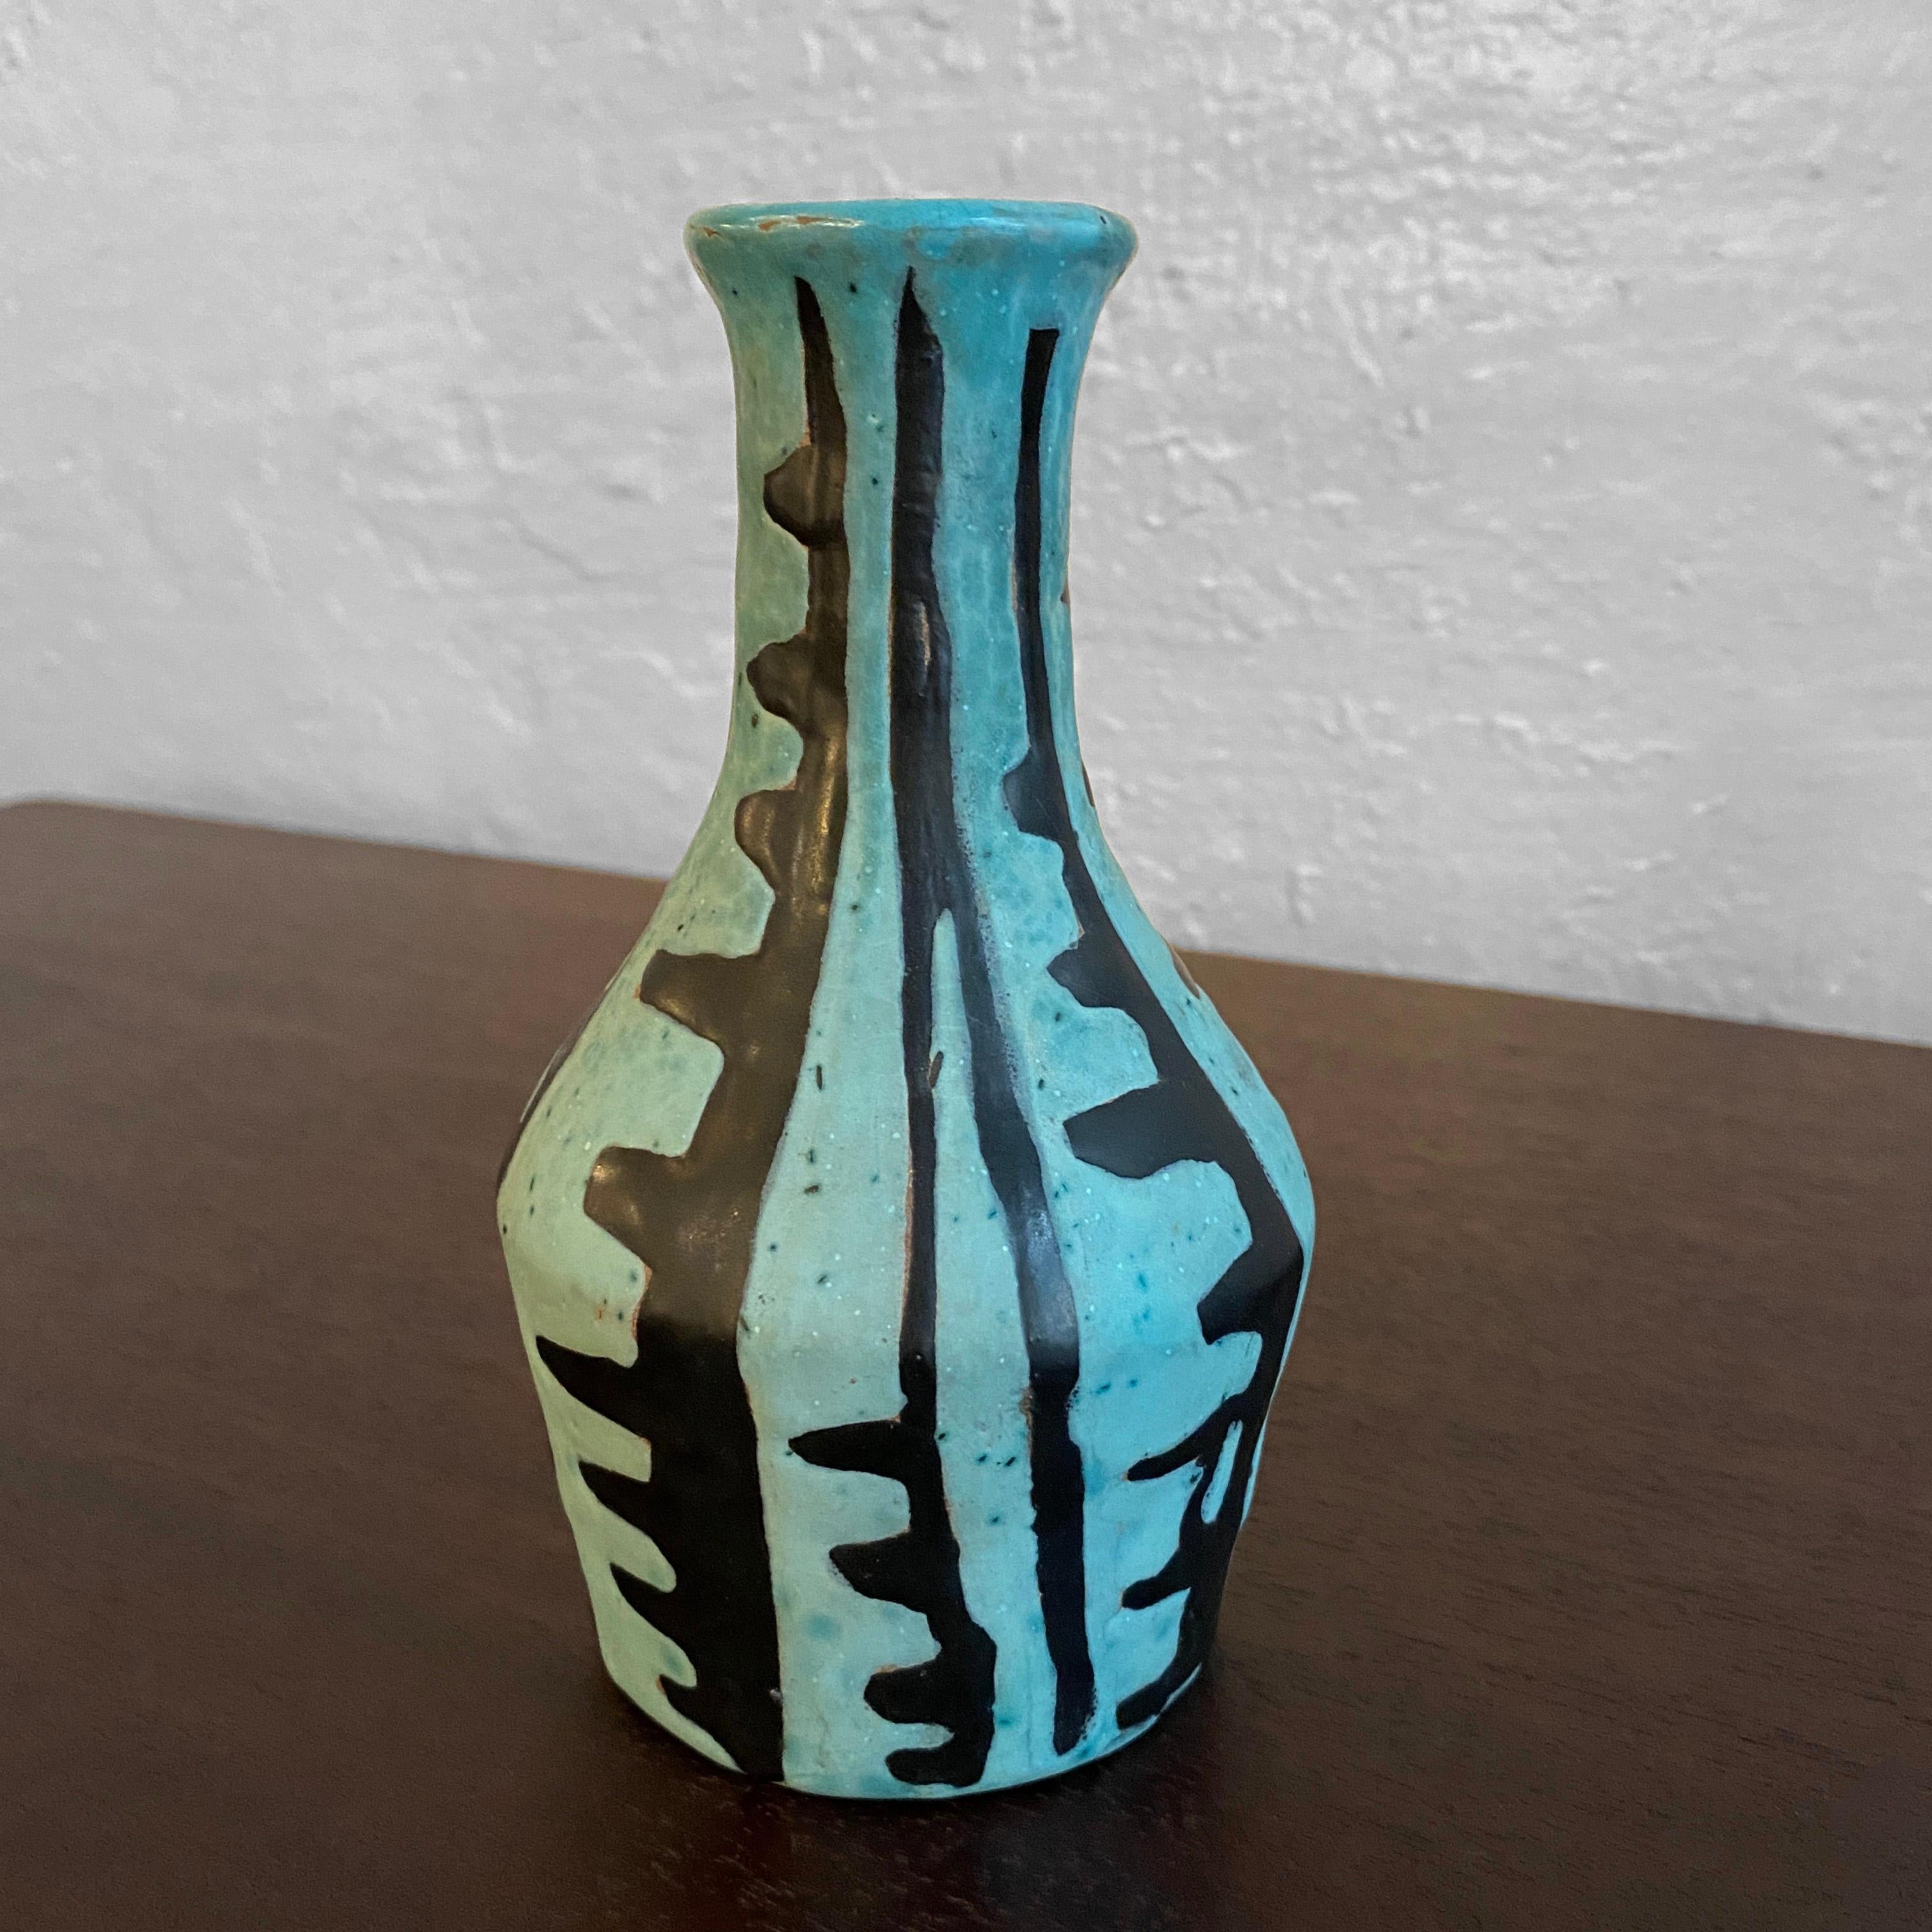 Small, Mid-Century Modern, art pottery vase by Hungarian artist Livia Gorka features a hand-painted, tribal motif in black and blue. The mouth opening measures 1 inch.